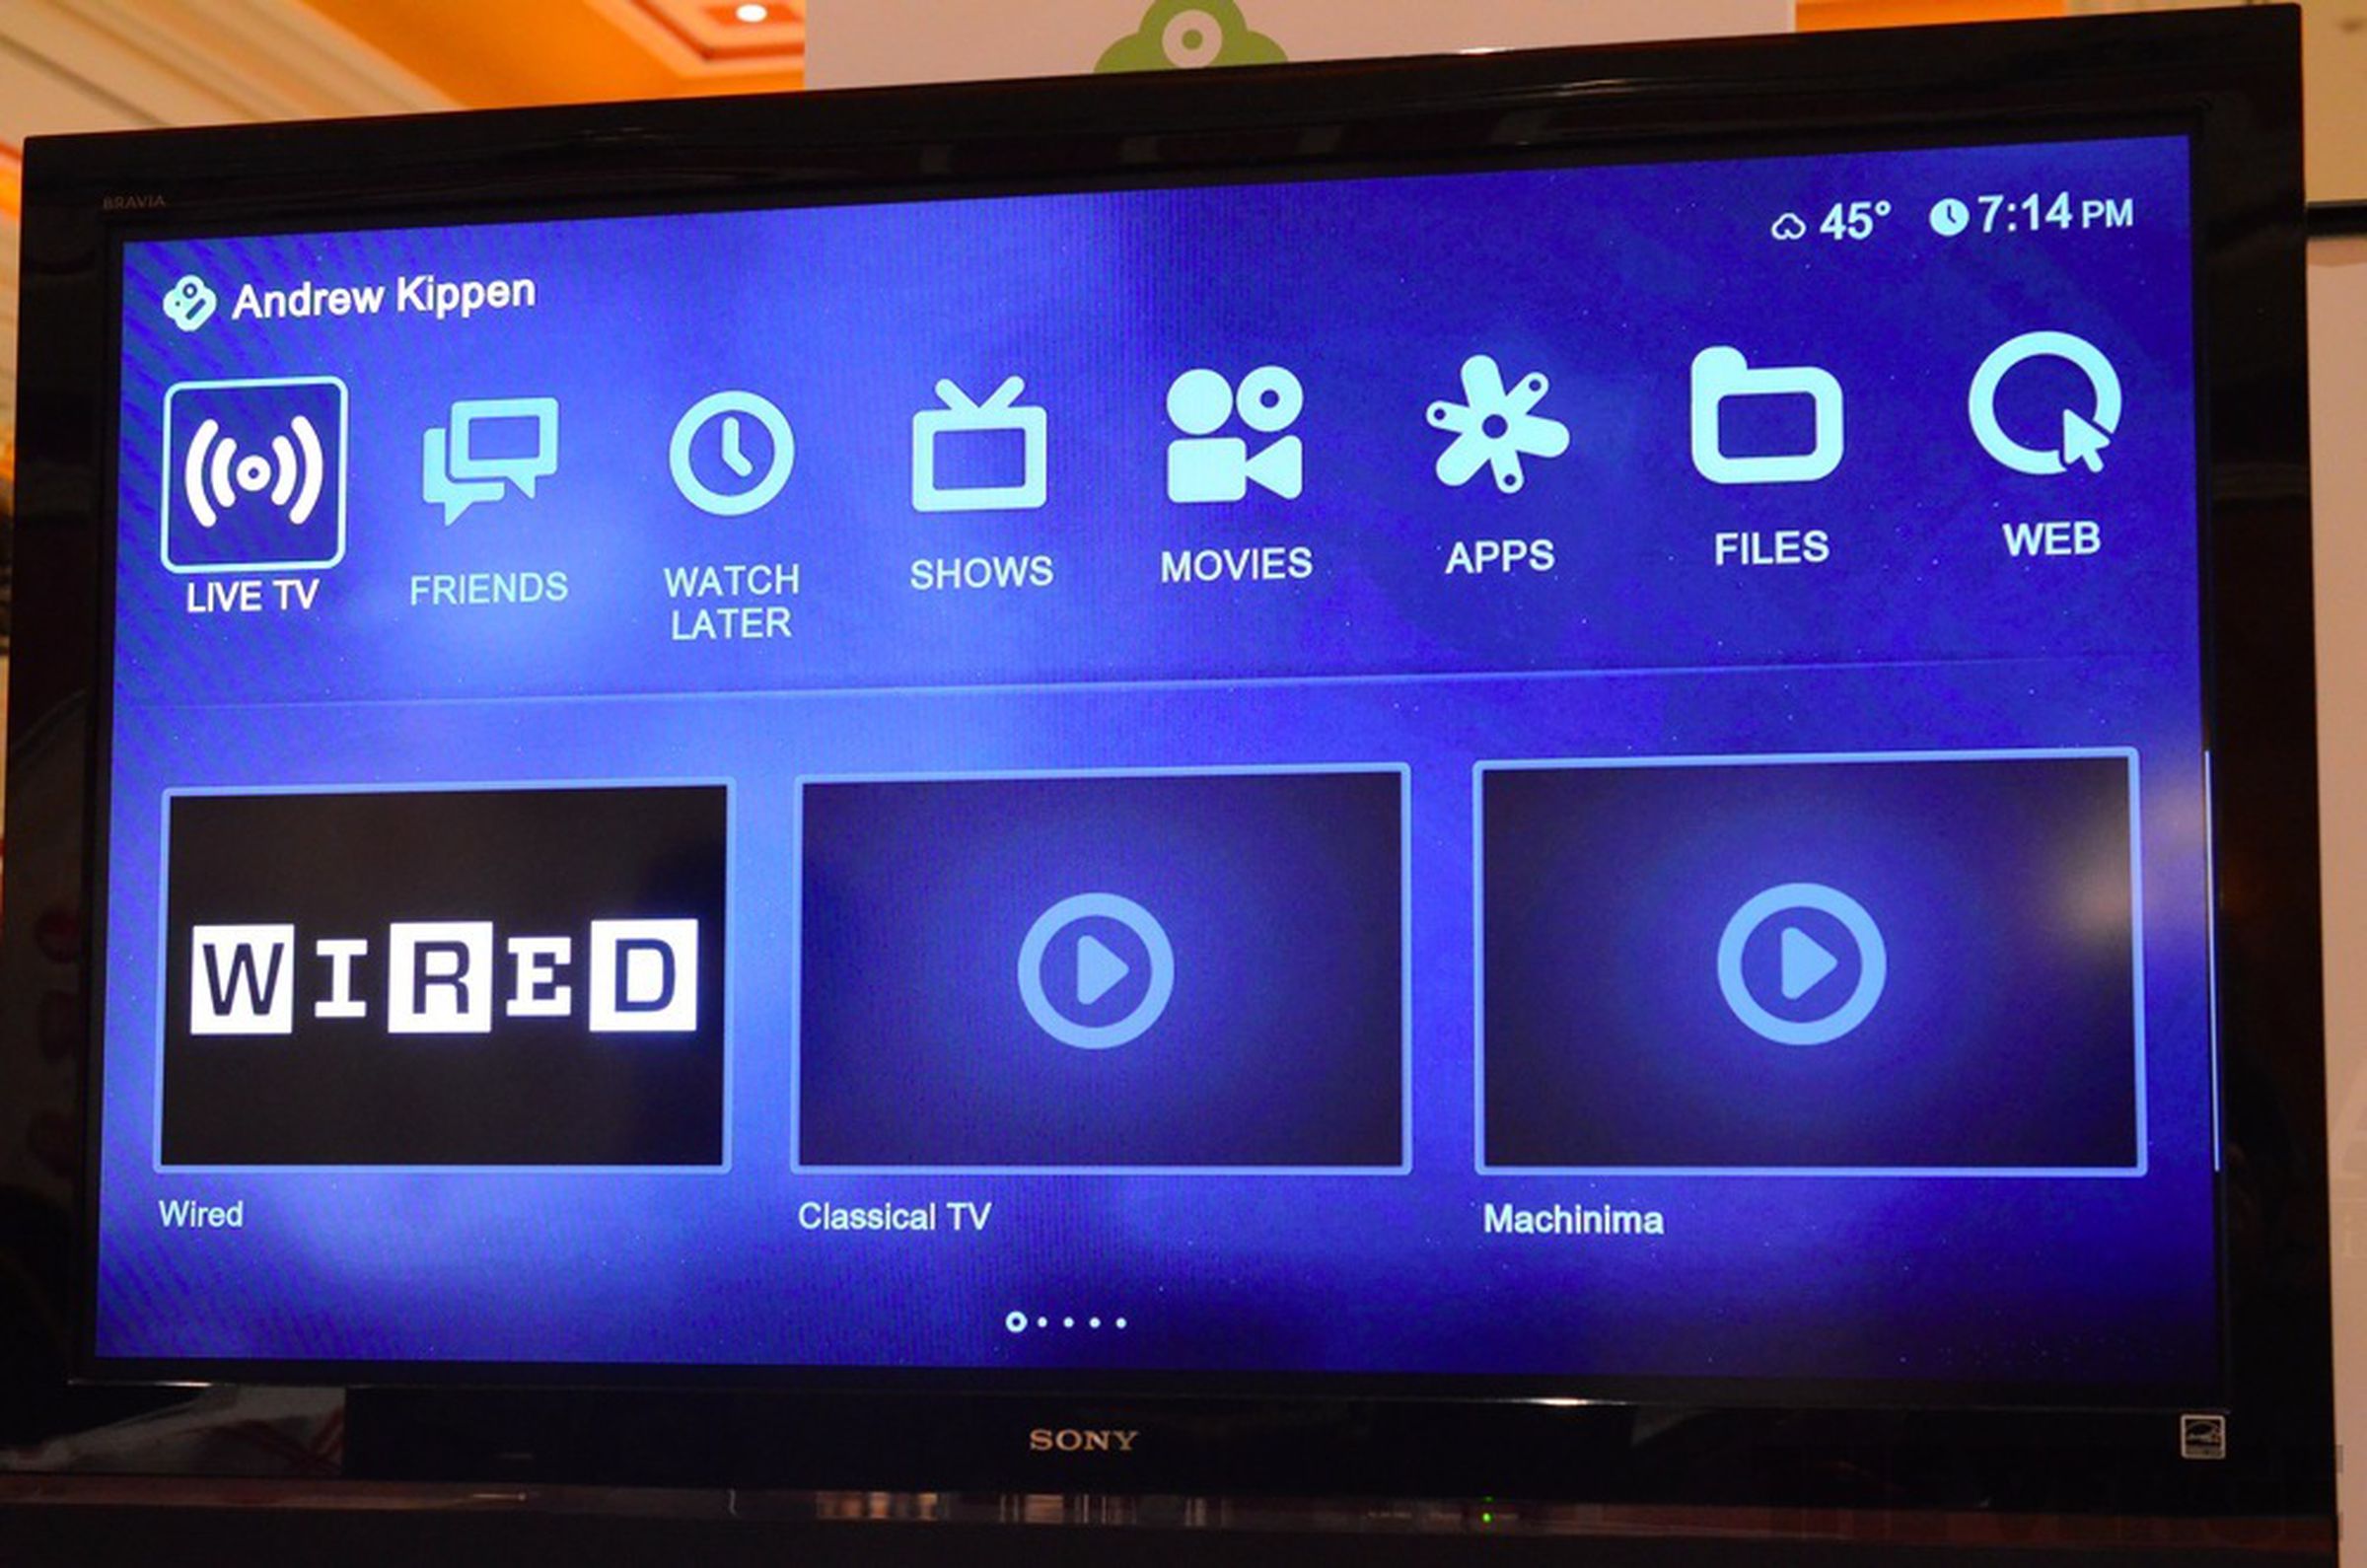 Boxee Live TV hands-on pictures